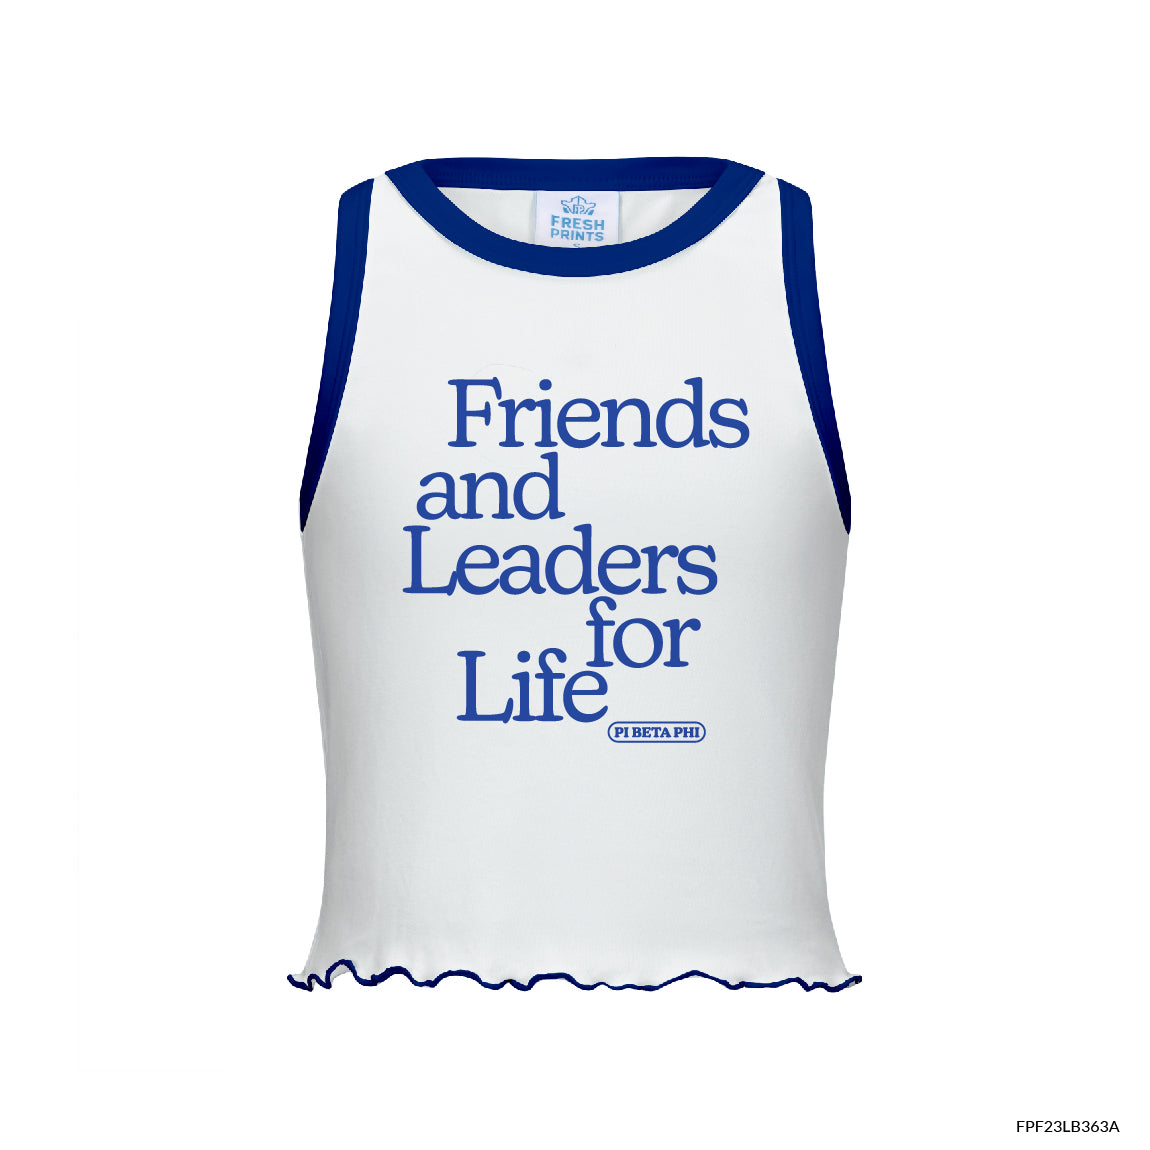 Friends and Leaders